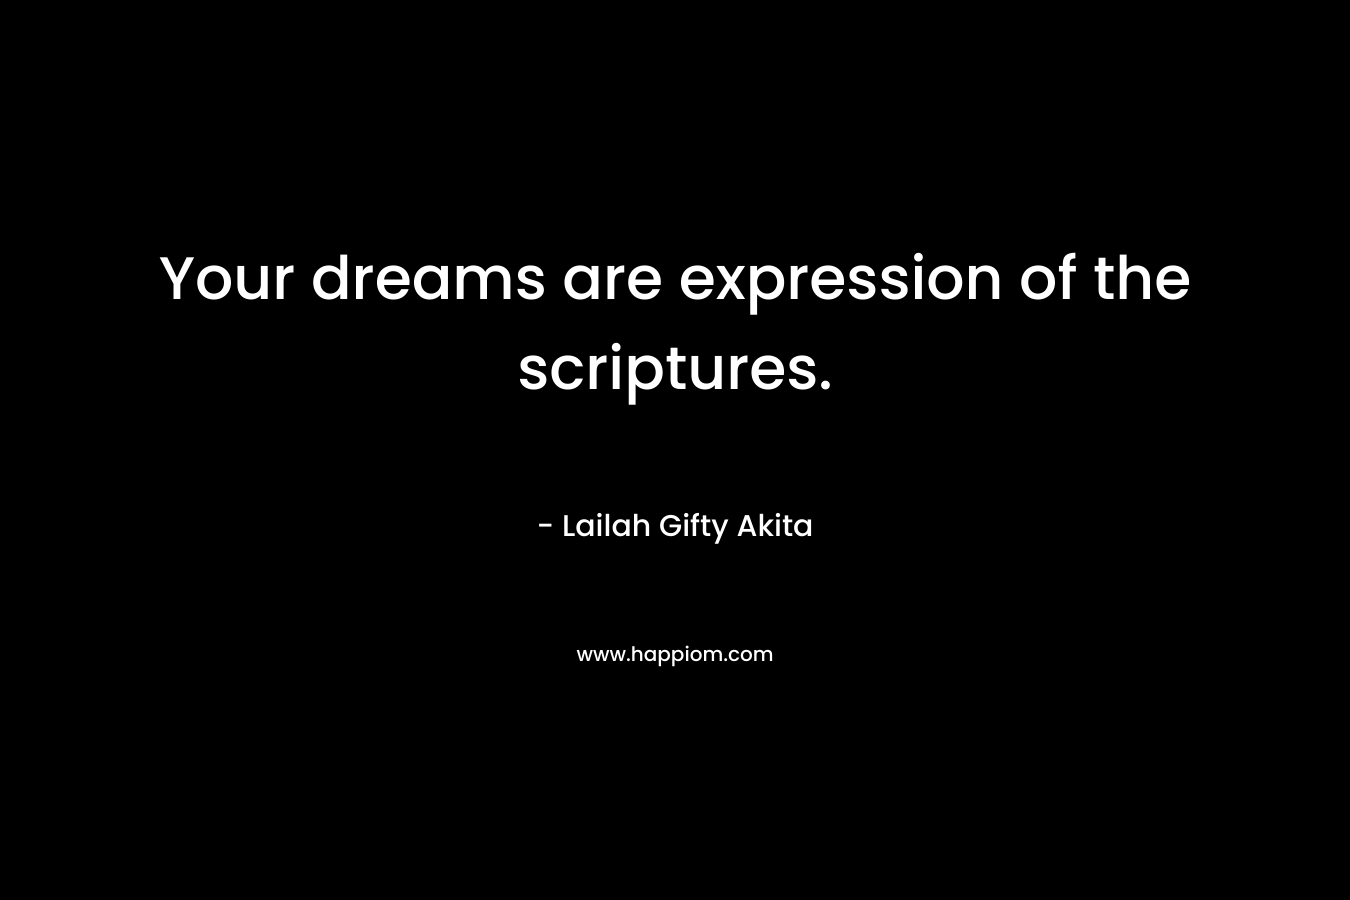 Your dreams are expression of the scriptures.